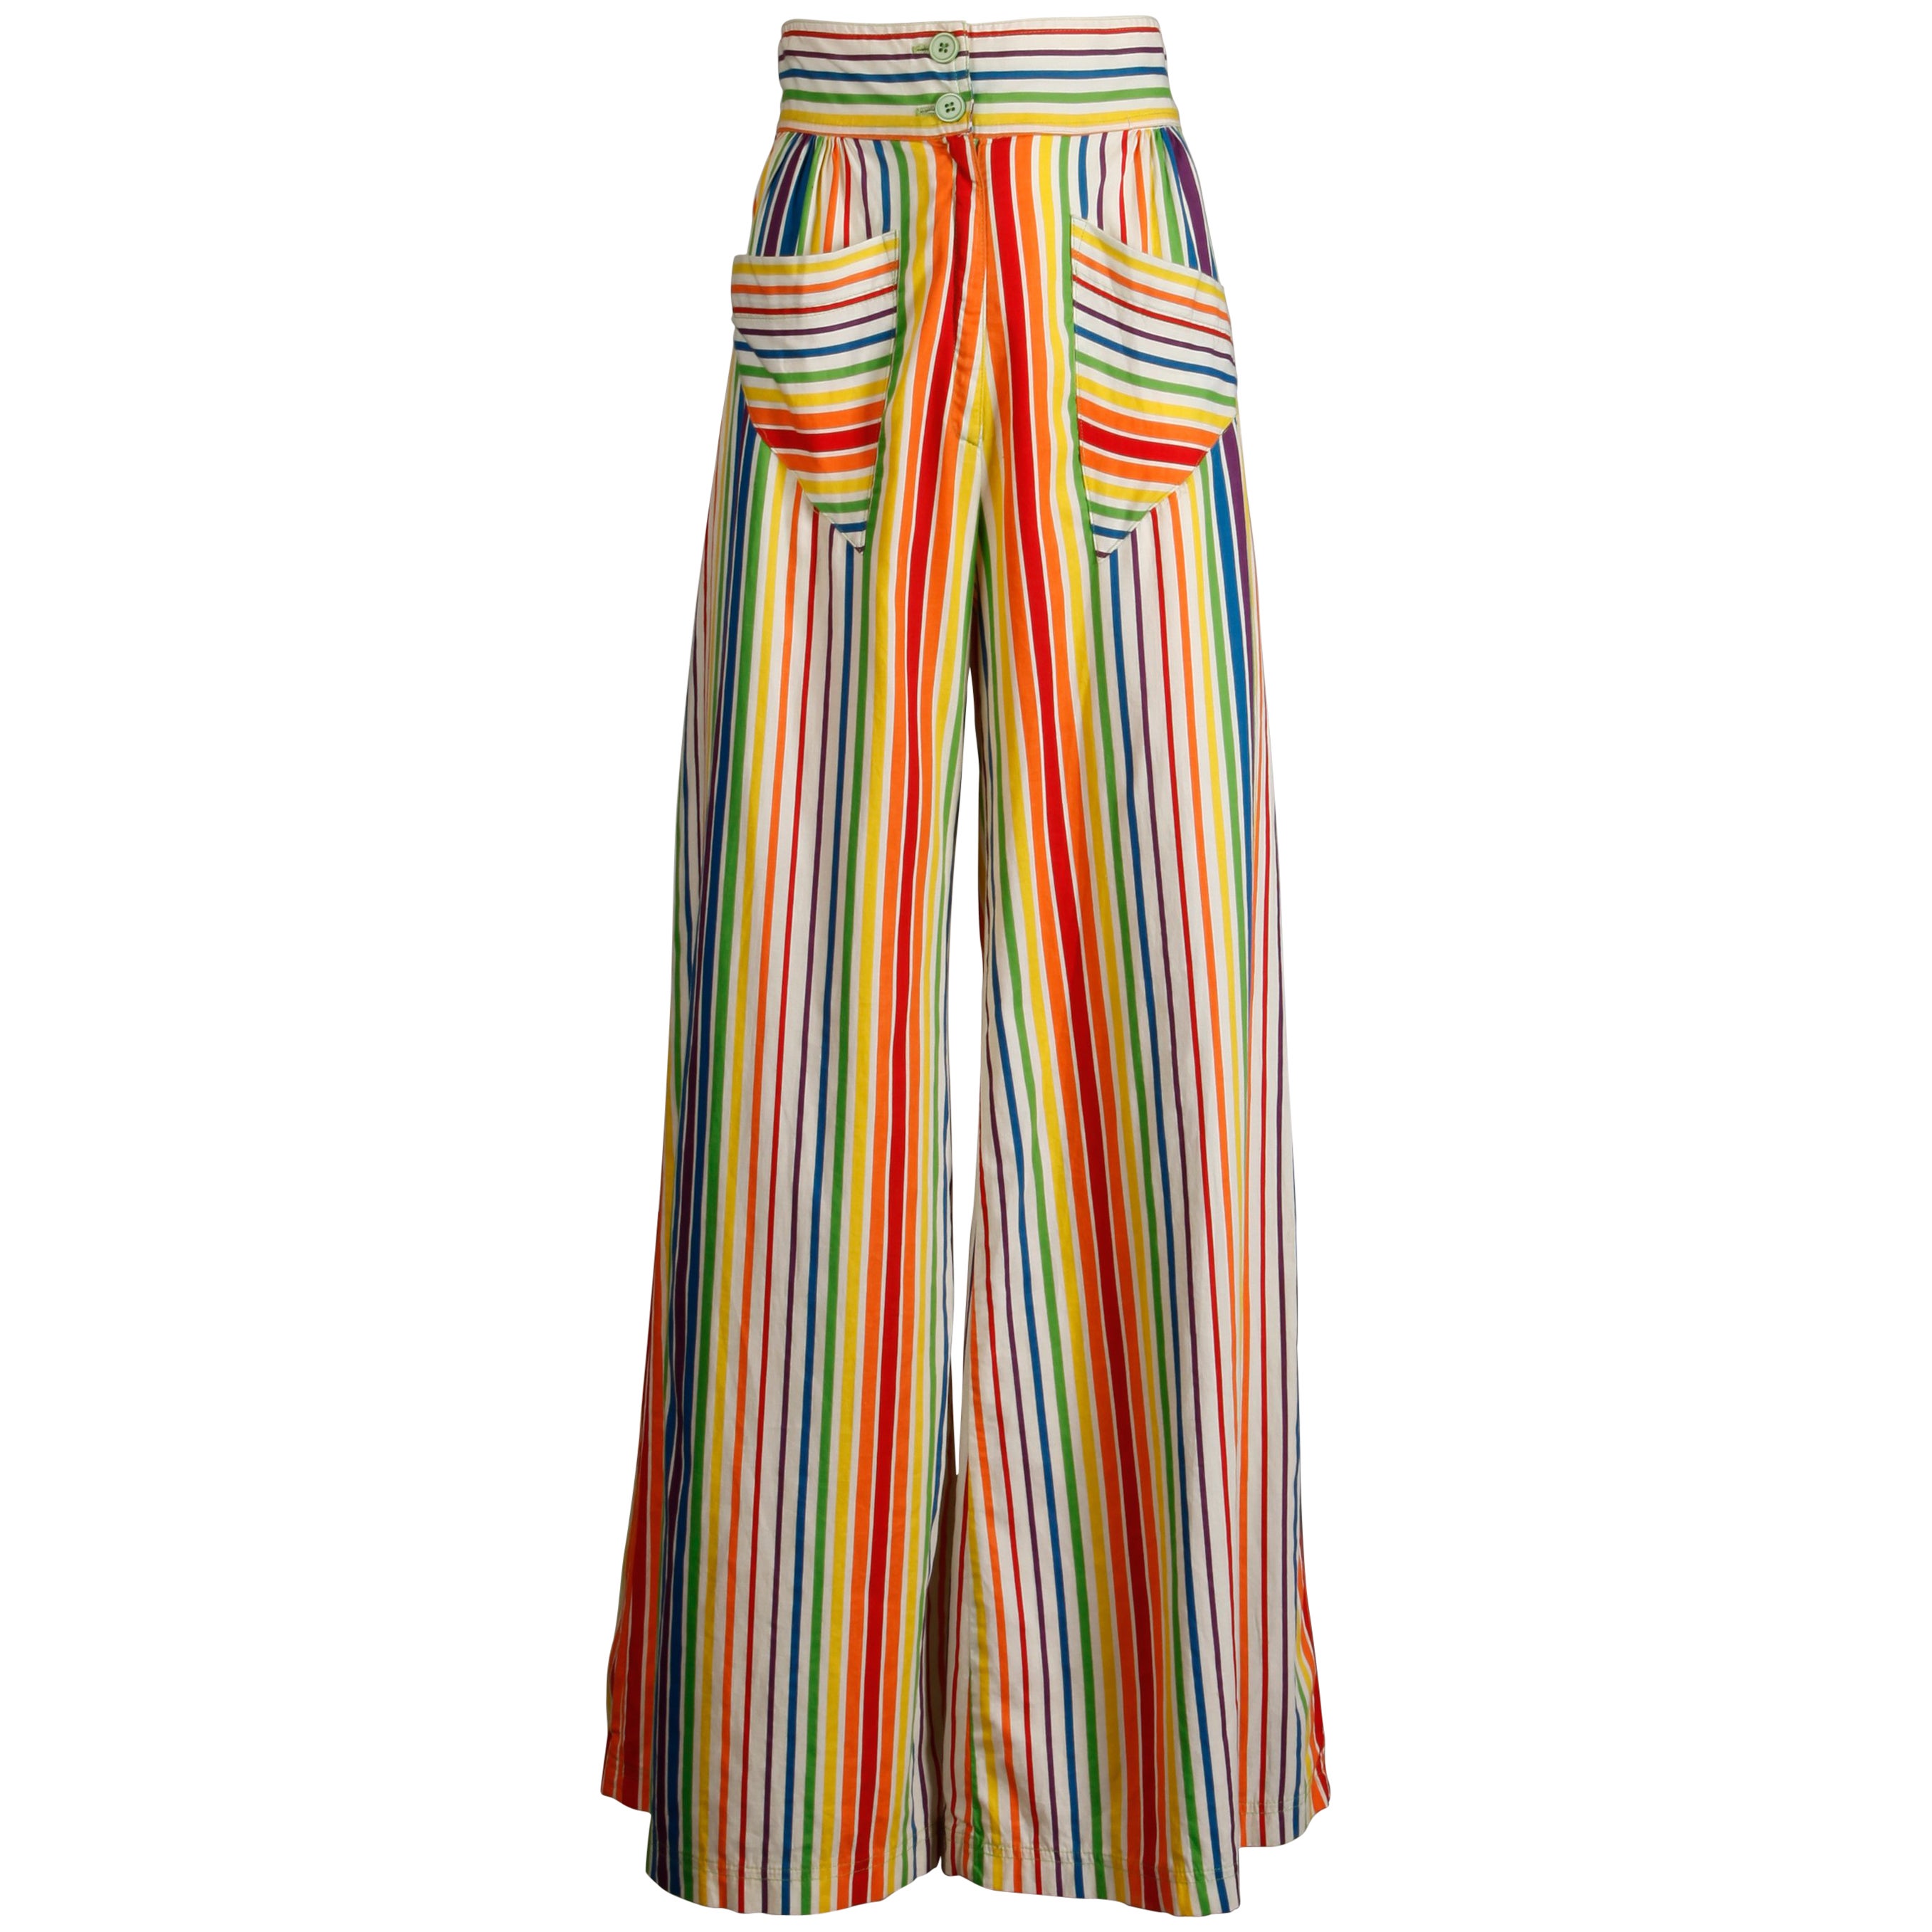 Betsey Johnson for Alley Cat Vintage Rainbow Striped Palazzo Pants, 1970s  For Sale at 1stDibs | vintage rainbow pants, vintage rainbow striped jeans,  1970s palazzo pants